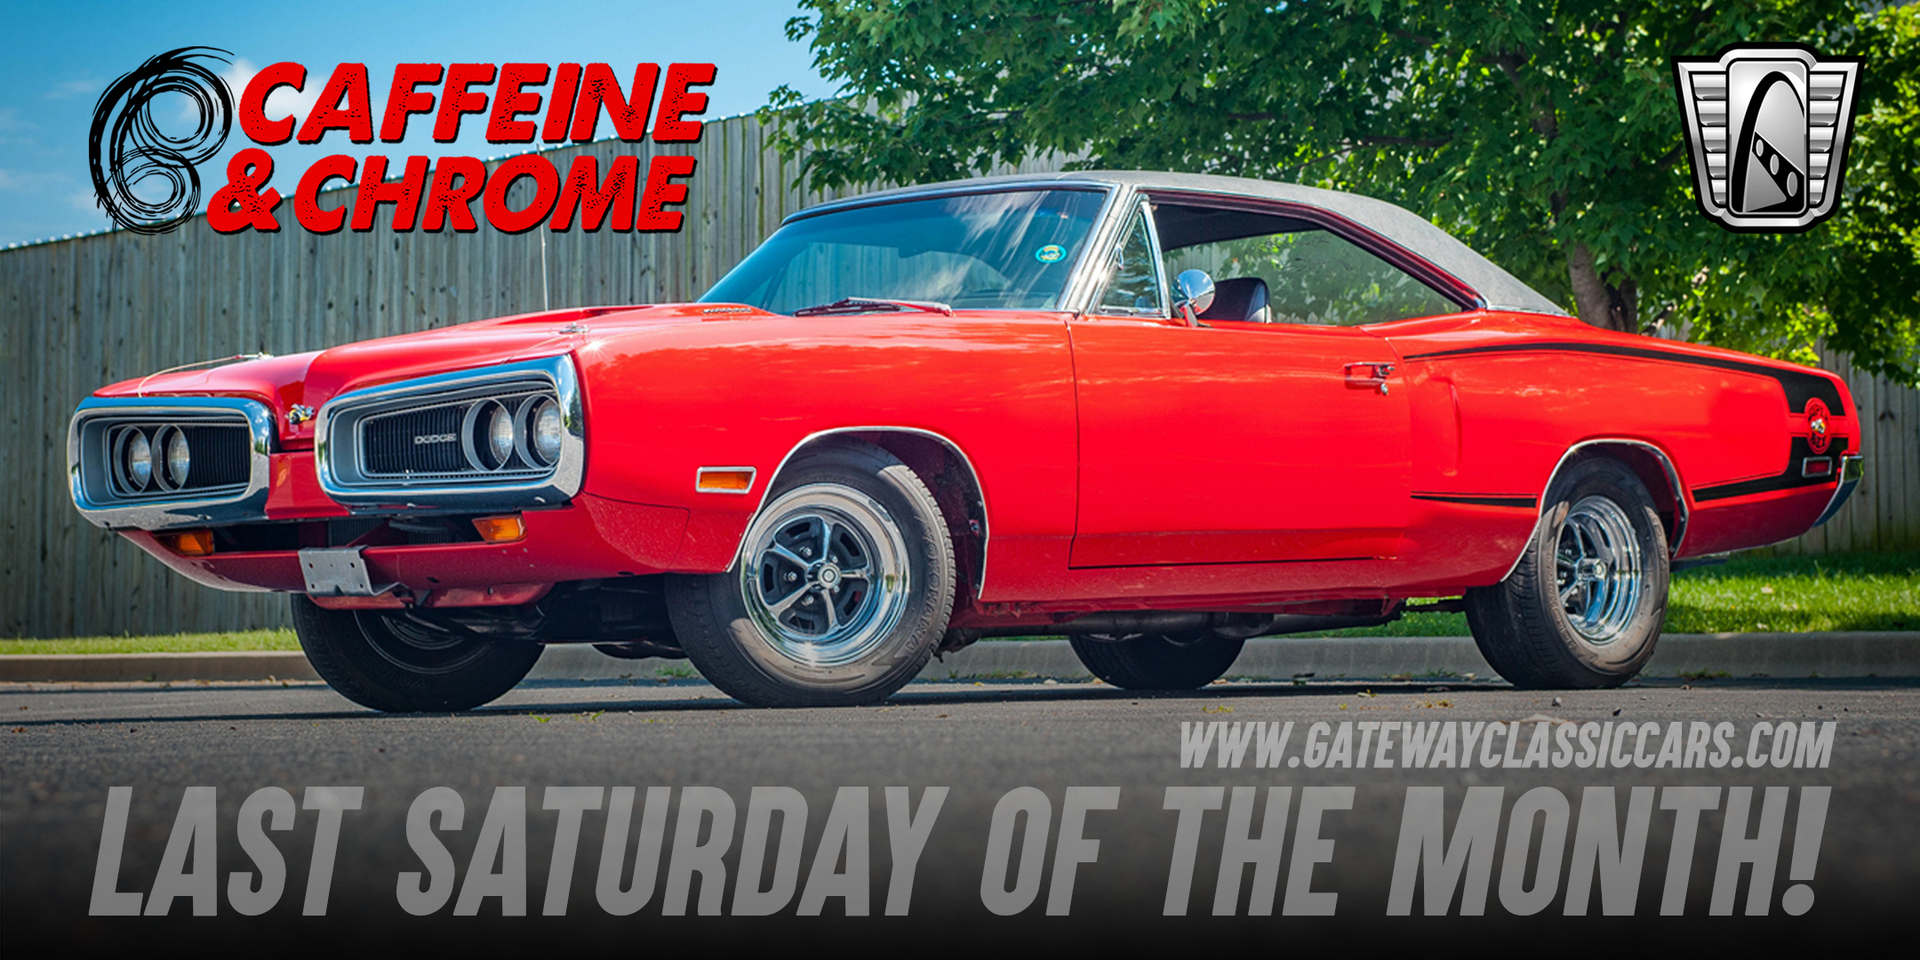 Caffeine and Chrome-Classic Cars and Coffee at Gateway Classic Cars of St. Louis, O'Fallon, Illinois, United States